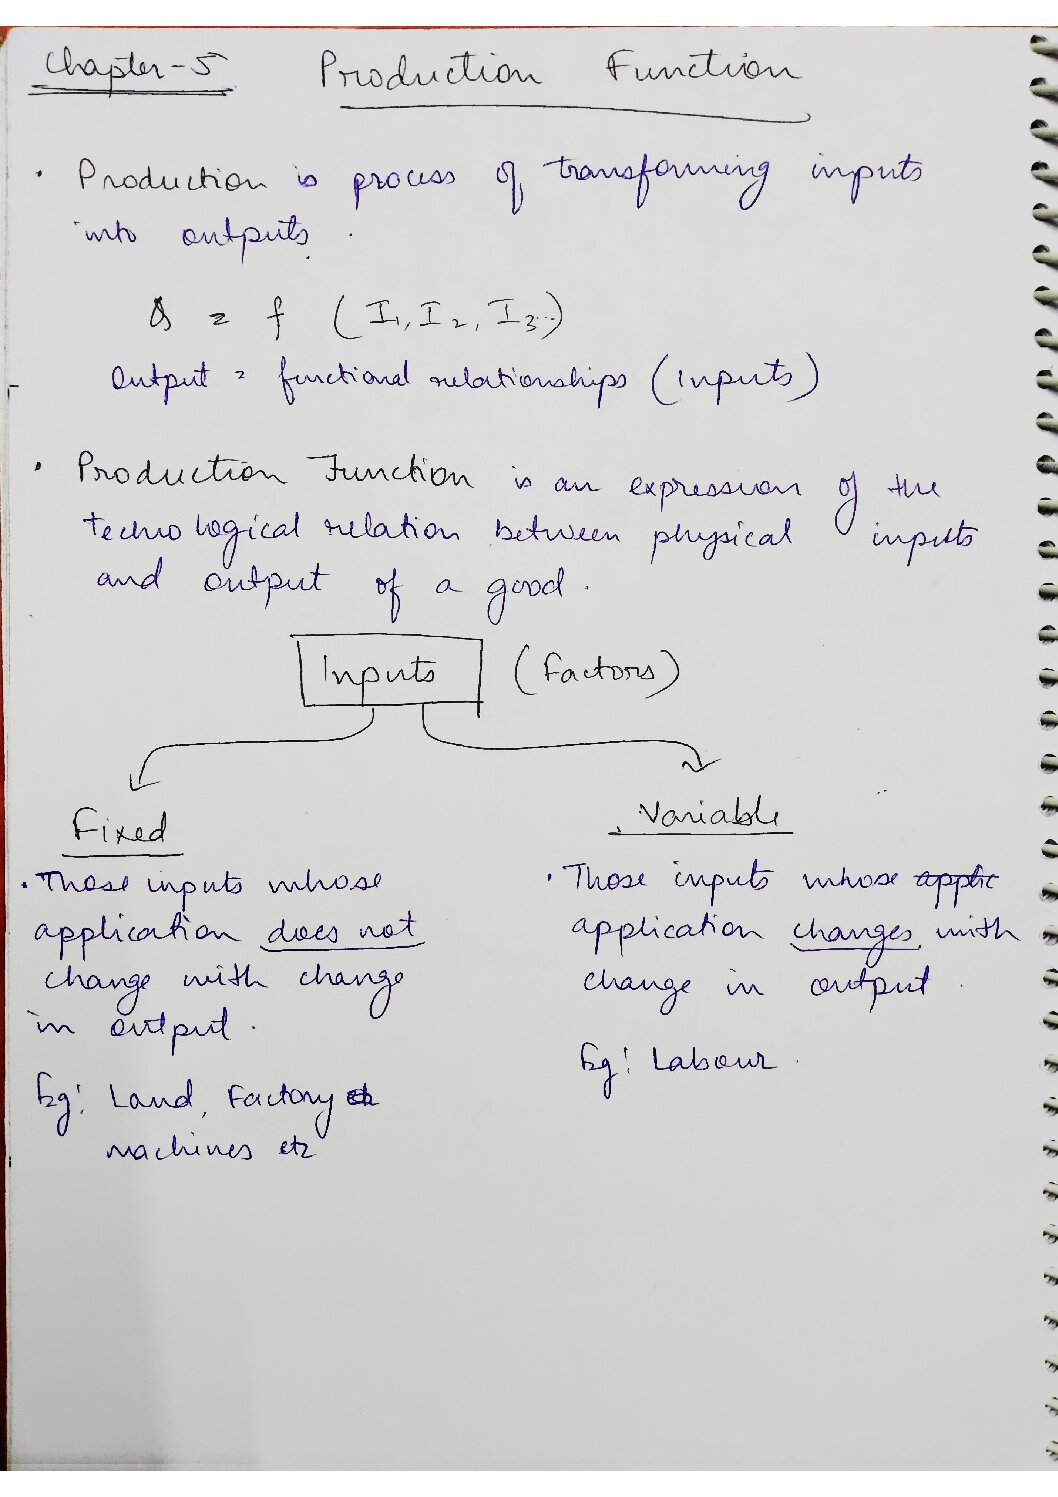 production function notes